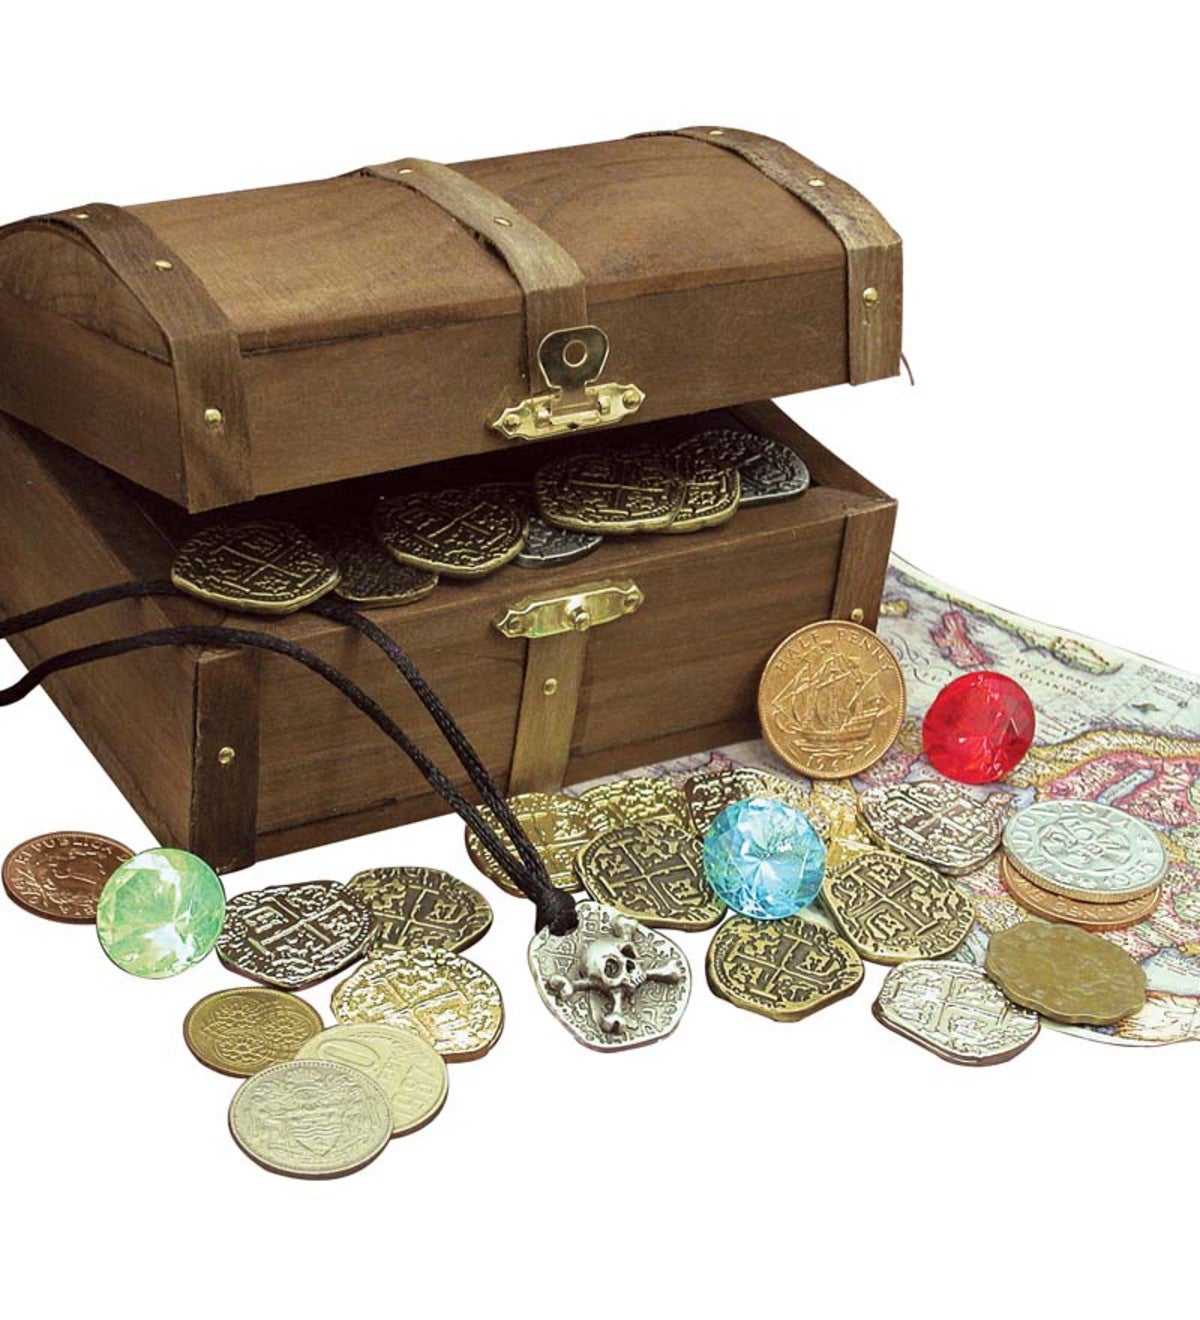 Kid's Treasure Chest with Replica Pirate Coins and Gems